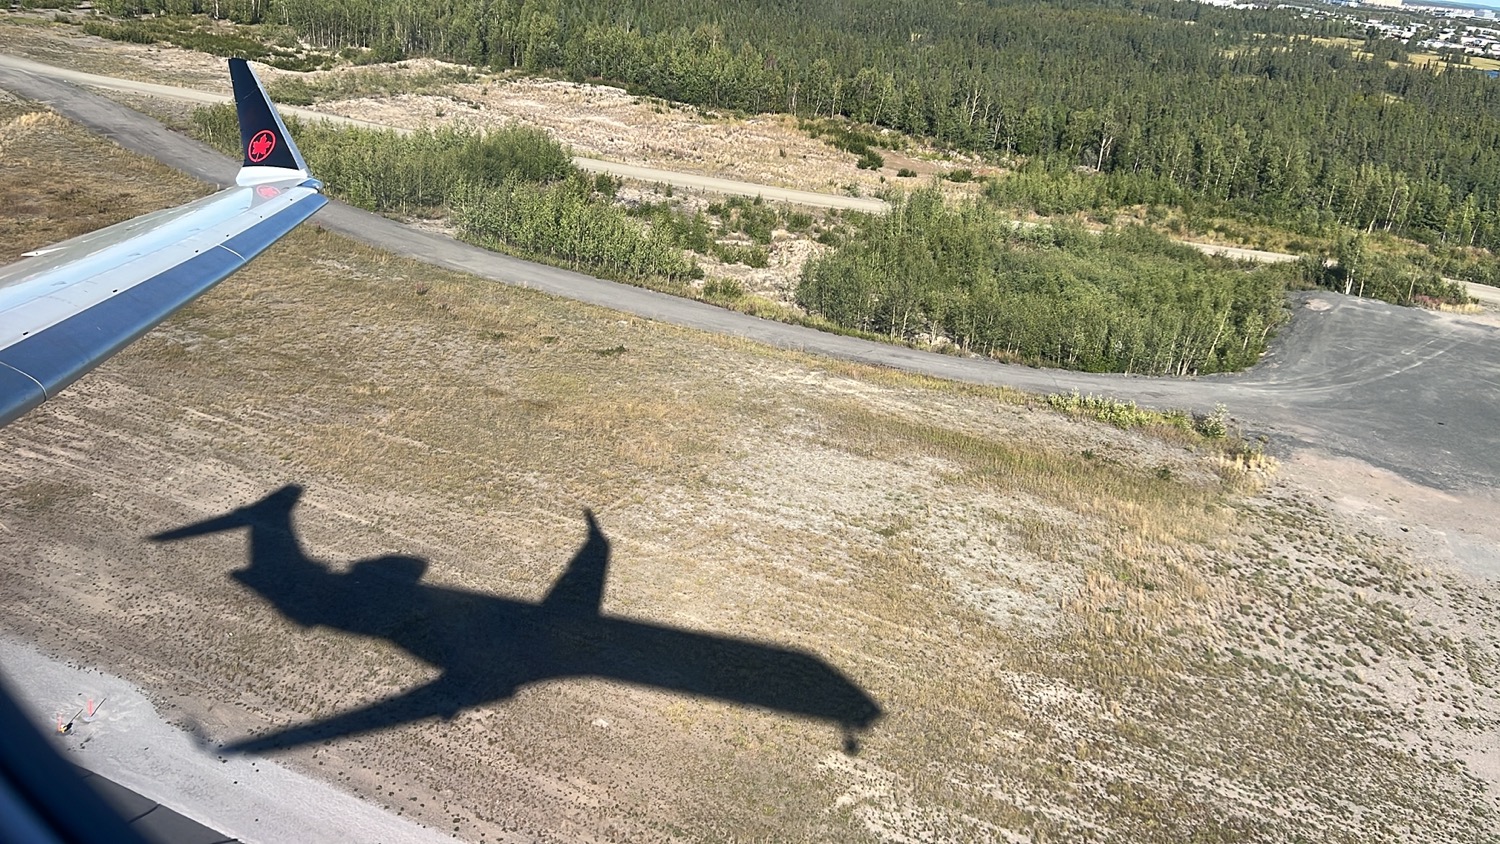 an shadow of an airplane on a dirt road